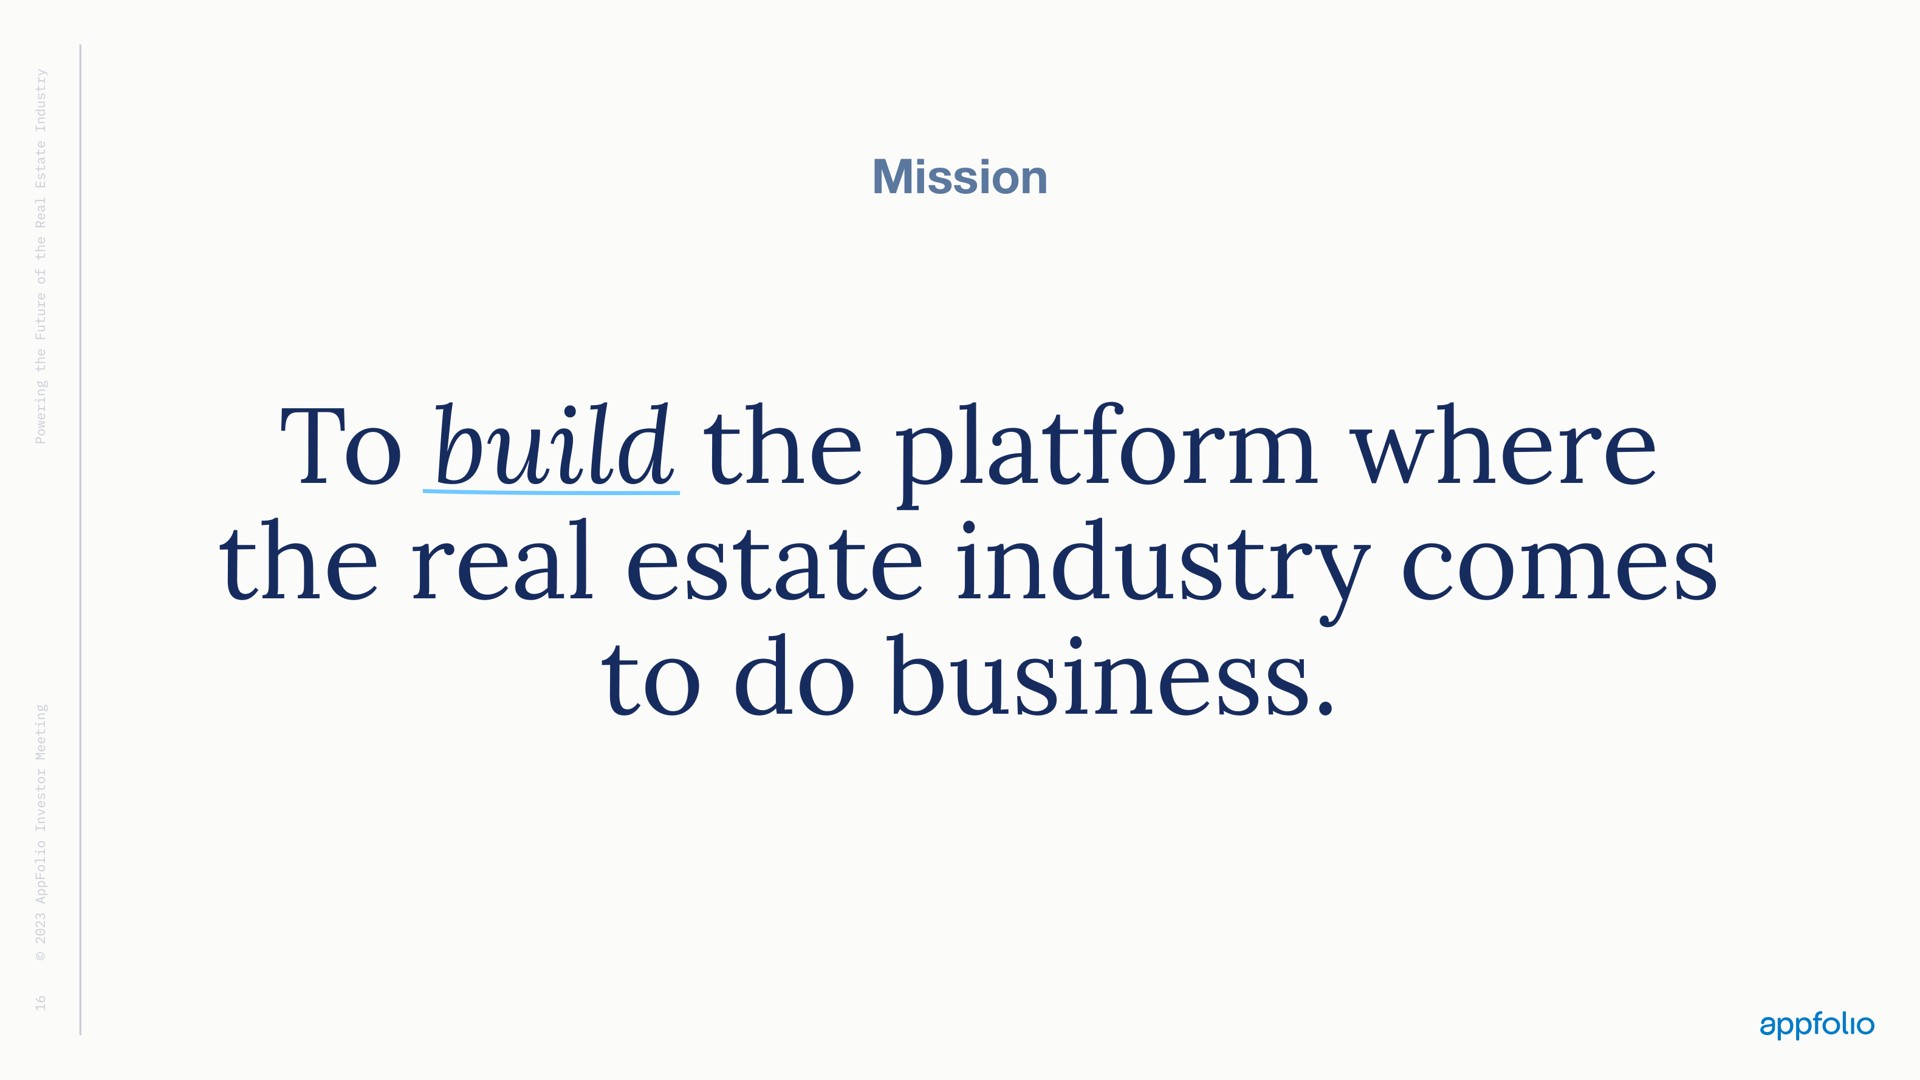 mission to build the platform where the real estate industry comes to do business | AppFolio